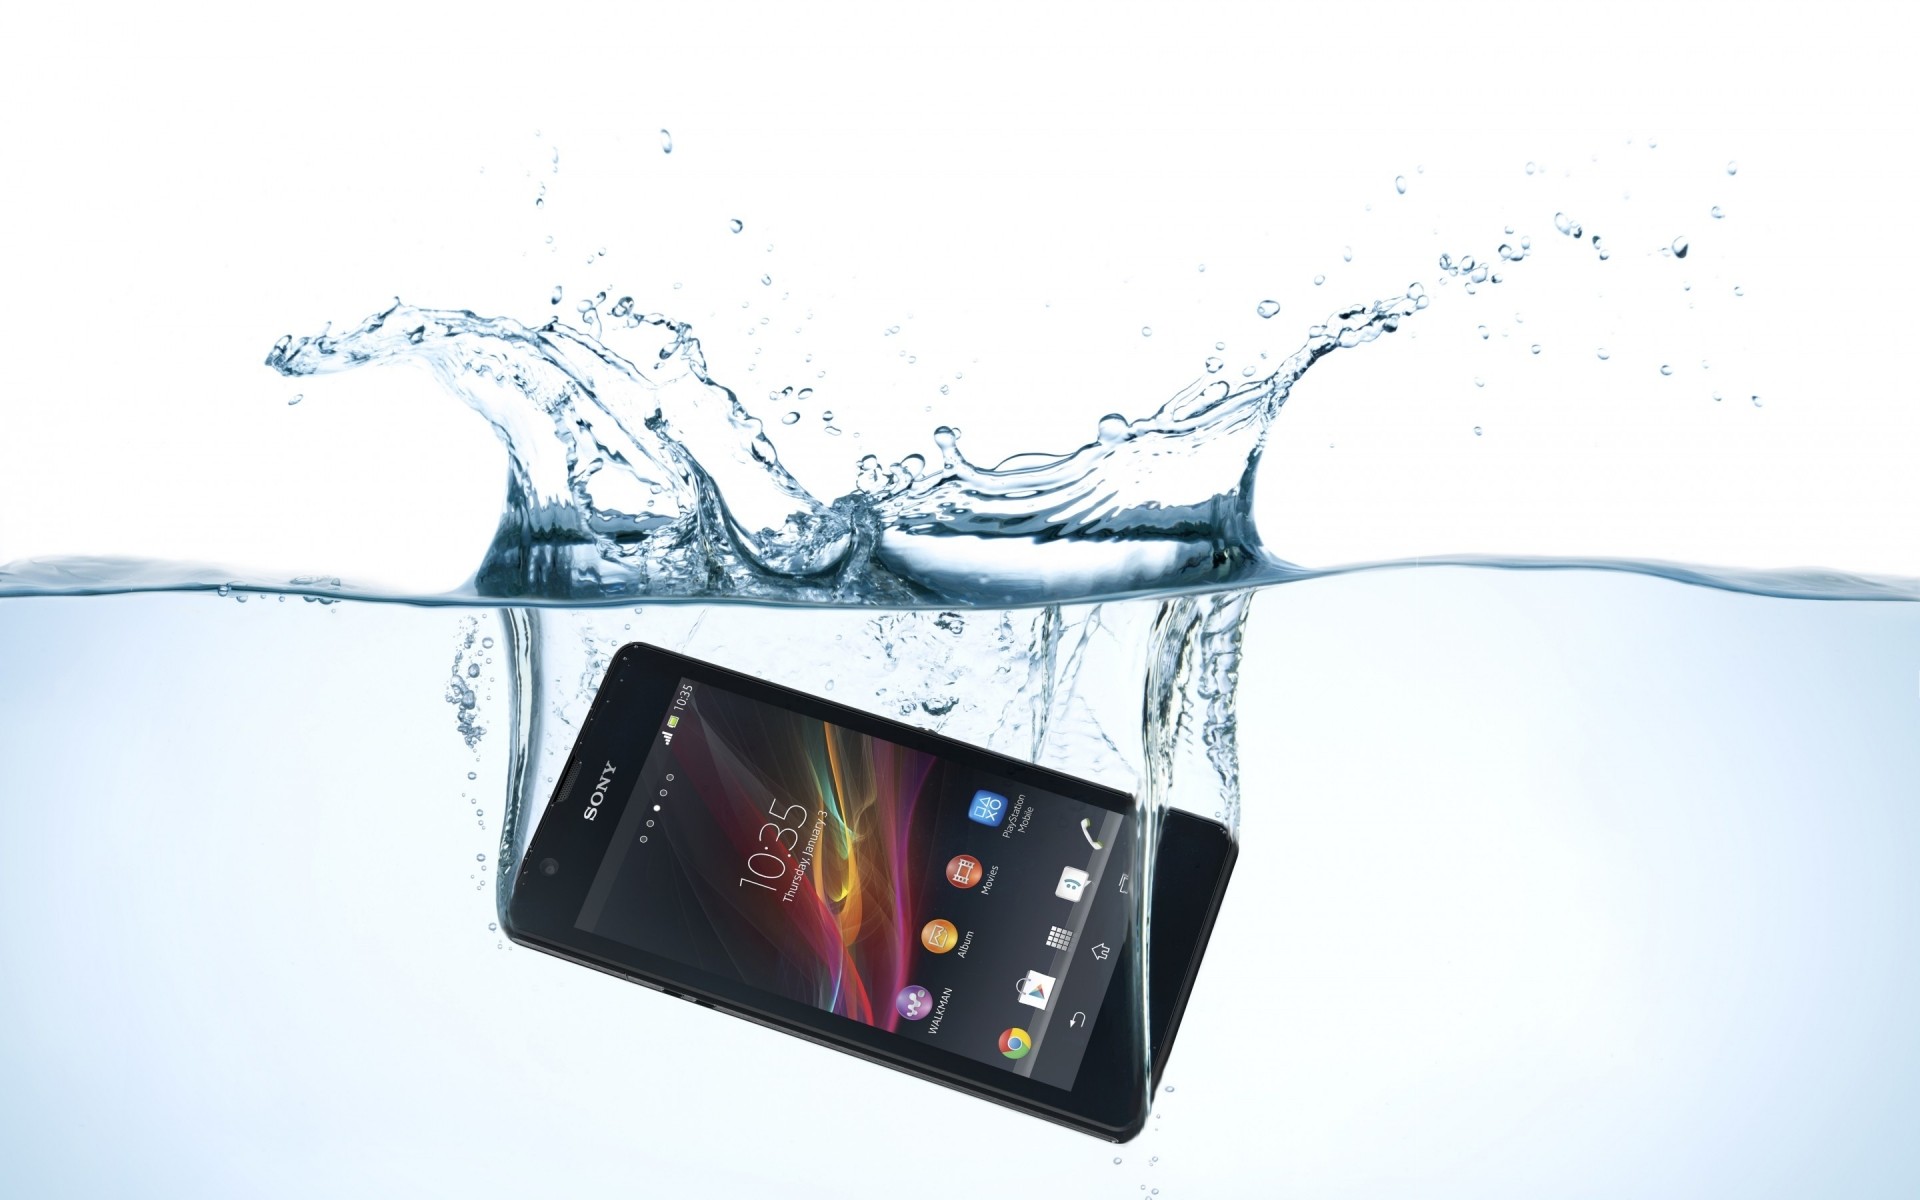 Sony Telephone Motion Connection Technology Smartphone - Sony First Waterproof Phone - HD Wallpaper 